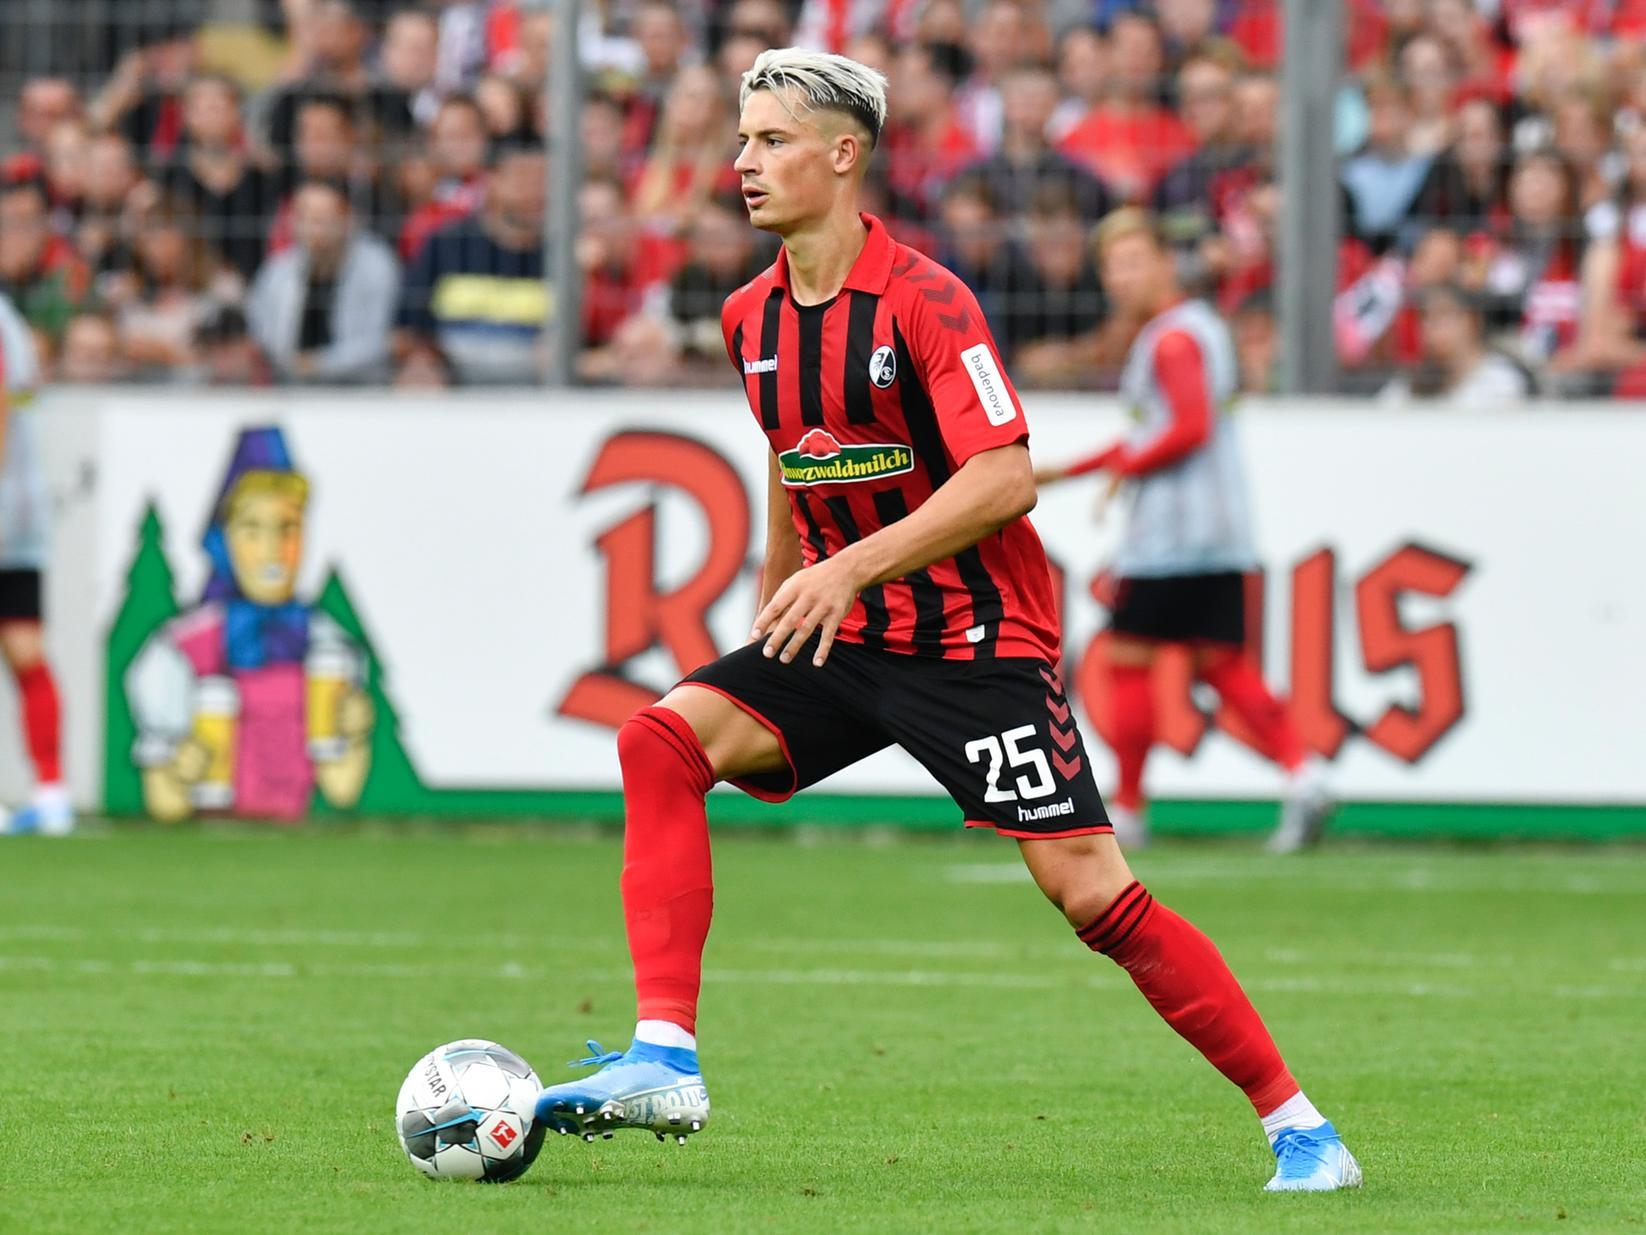 Reports have suggested that Leeds United have been scouting Freiburg's powerhouse defender Robin Koch, who has been capped twice at senior level for Germany and is said to be worth around 15m (Sport Witness)